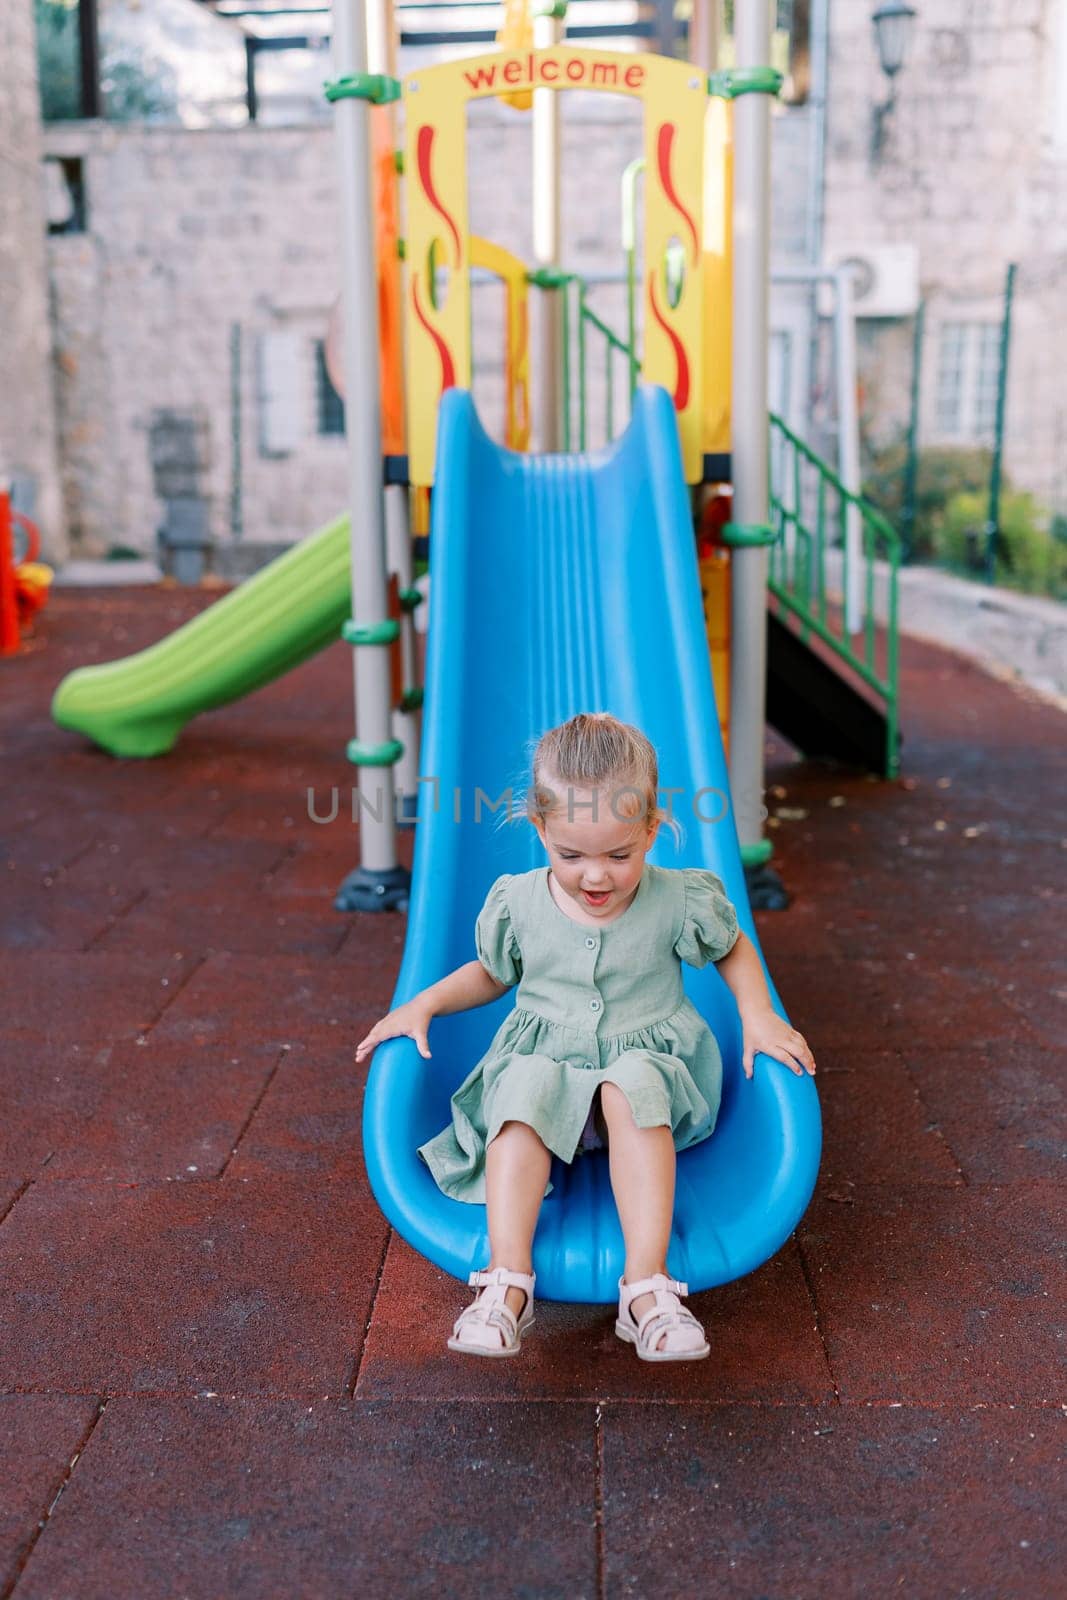 Little smiling girl sitting at the bottom of a plastic slide on a playground in the yard. High quality photo